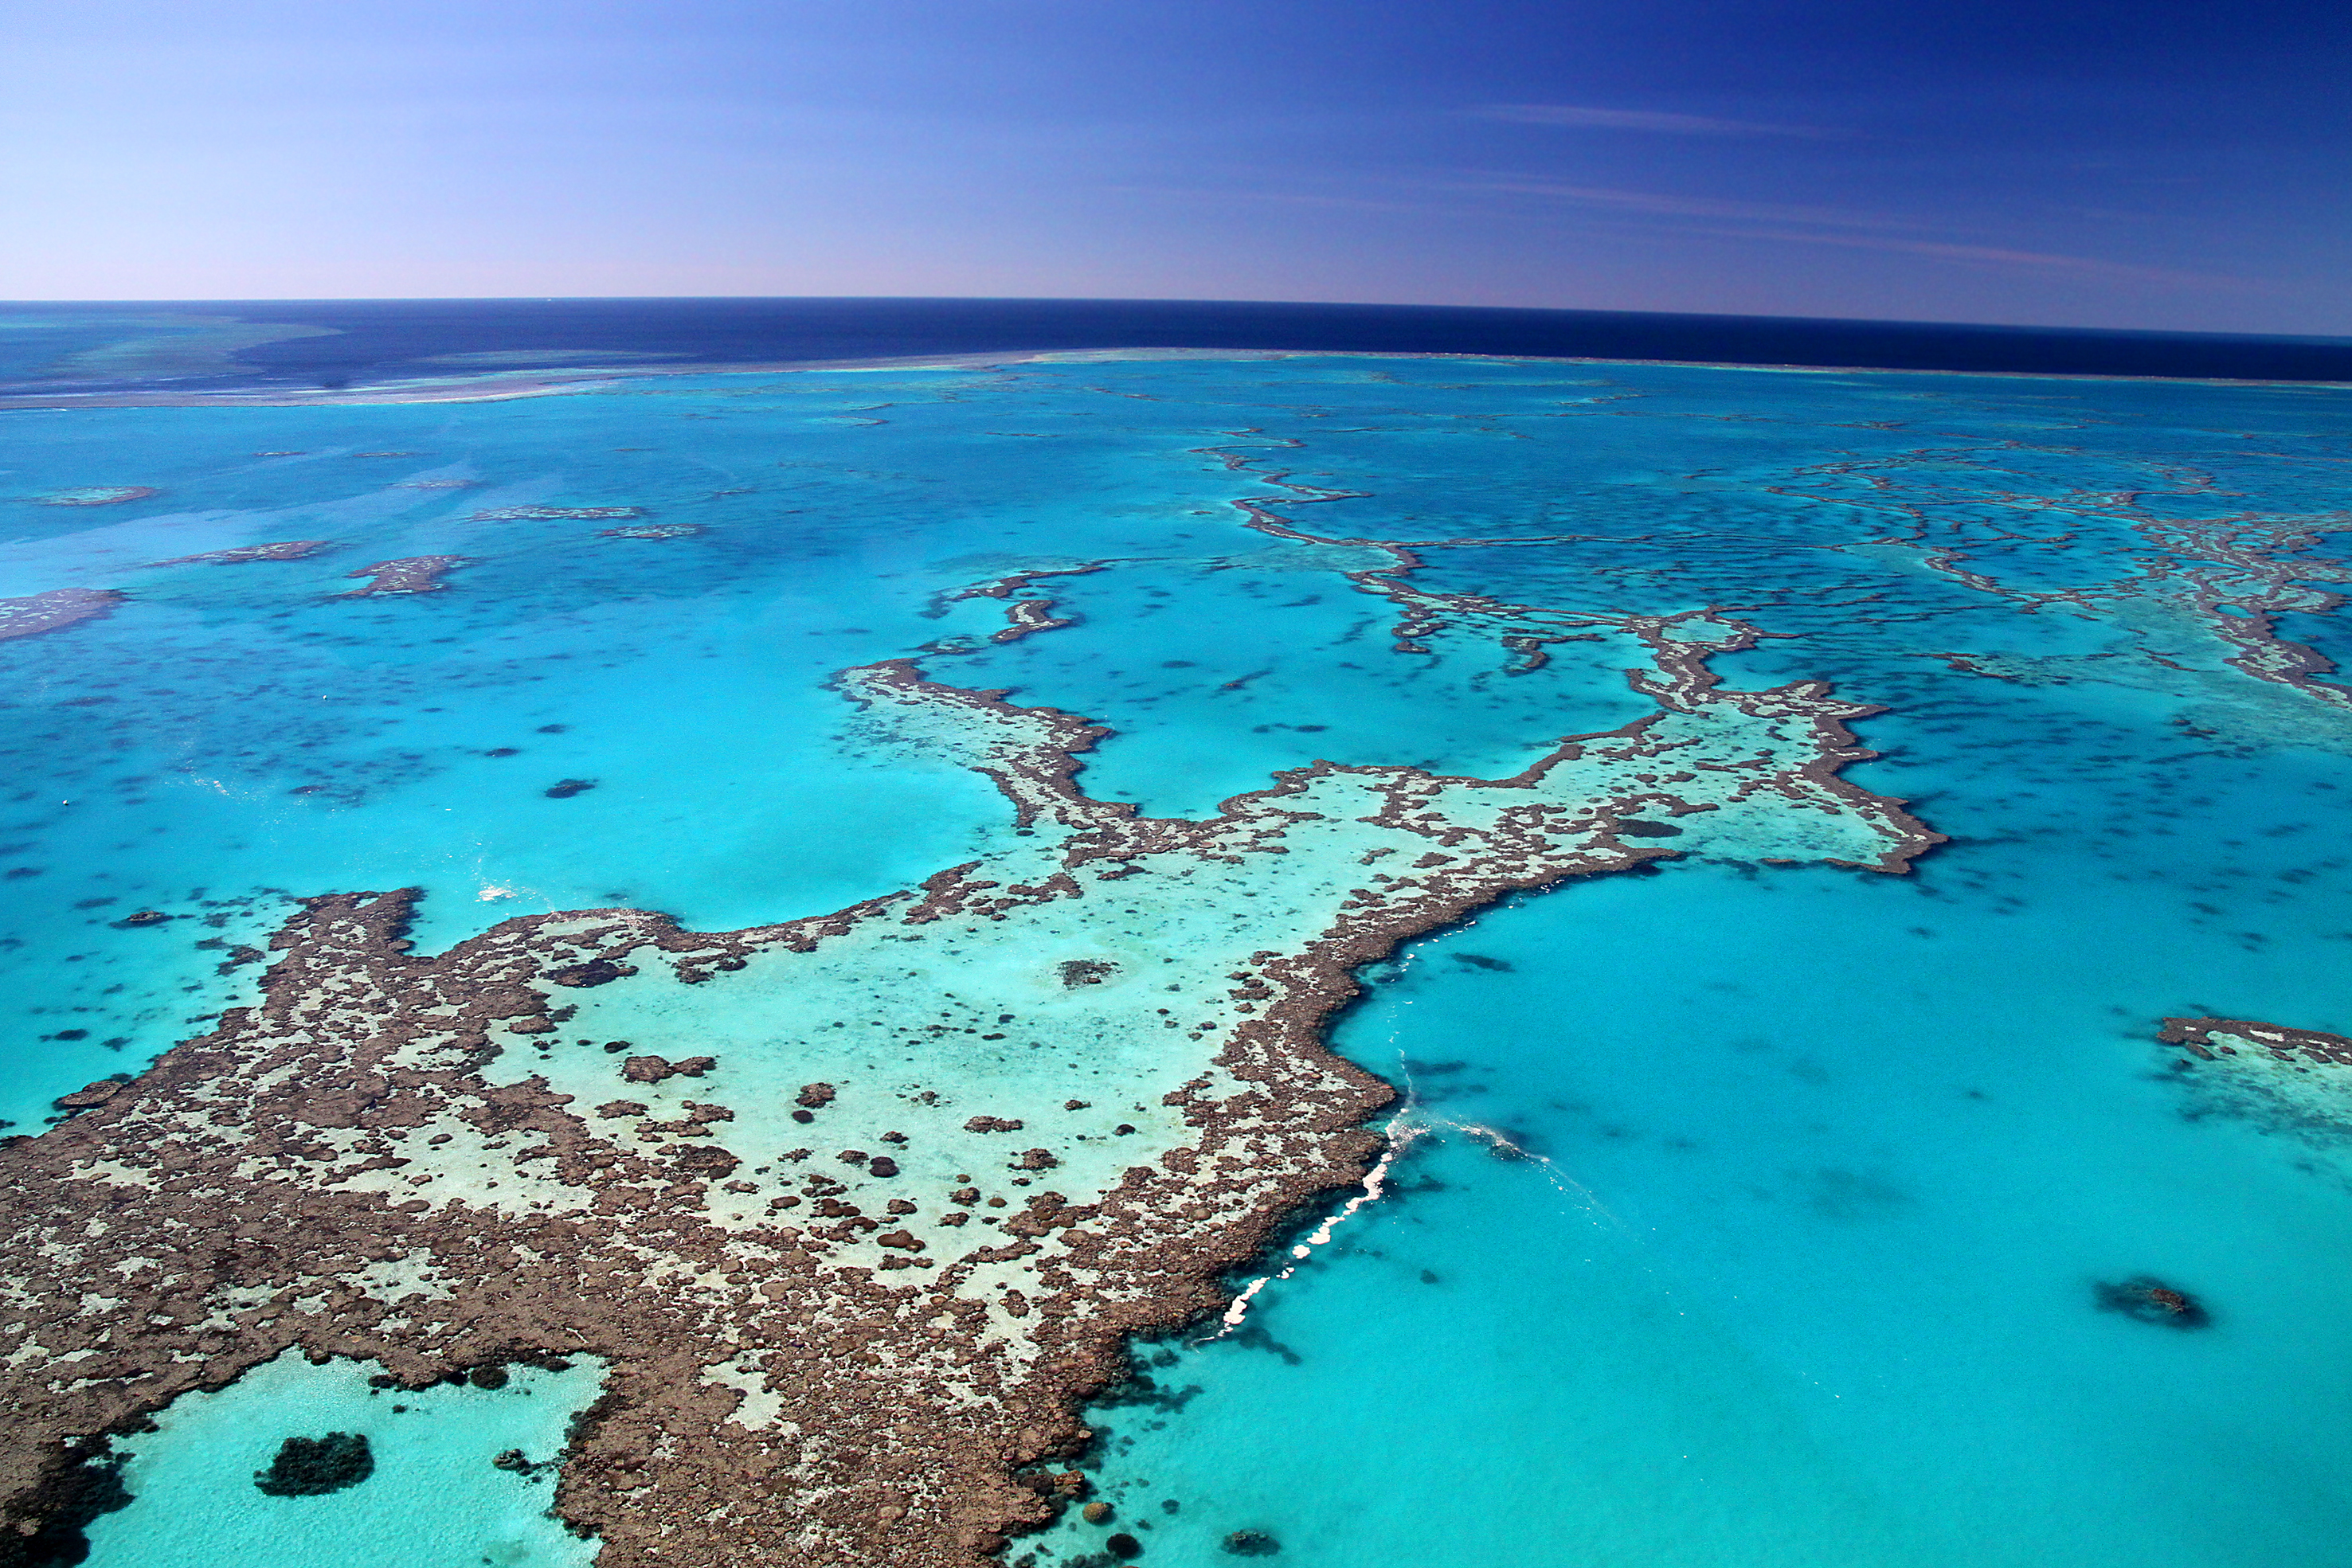 GREAT BARRIER REEF NAMED WORLD’S BEST PLACE TO VISIT IN 2016-2017 - The